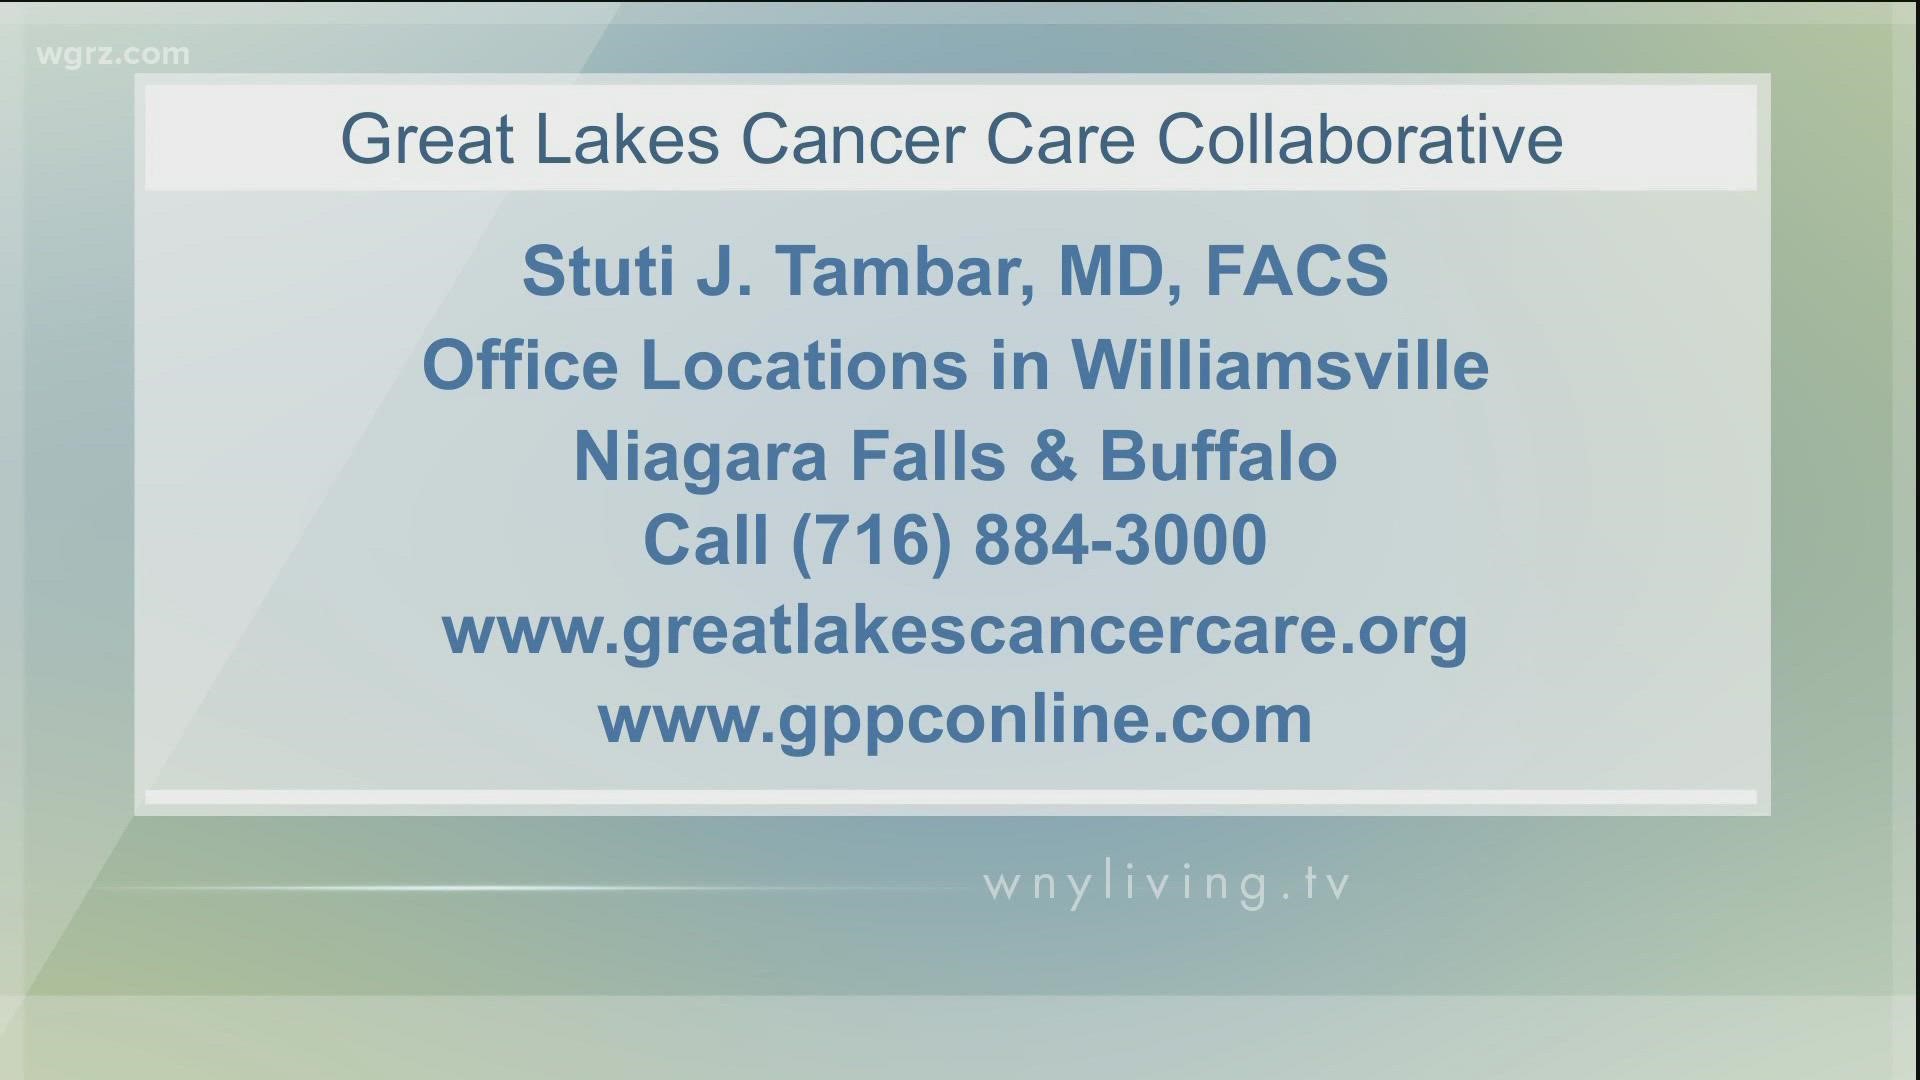 WNY Living - October 16 - Great Lakes Cancer Care Collaborative (THIS VIDEO IS SPONSORED BY GREAT LAKES CANCER CARE COLLABORATIVE)